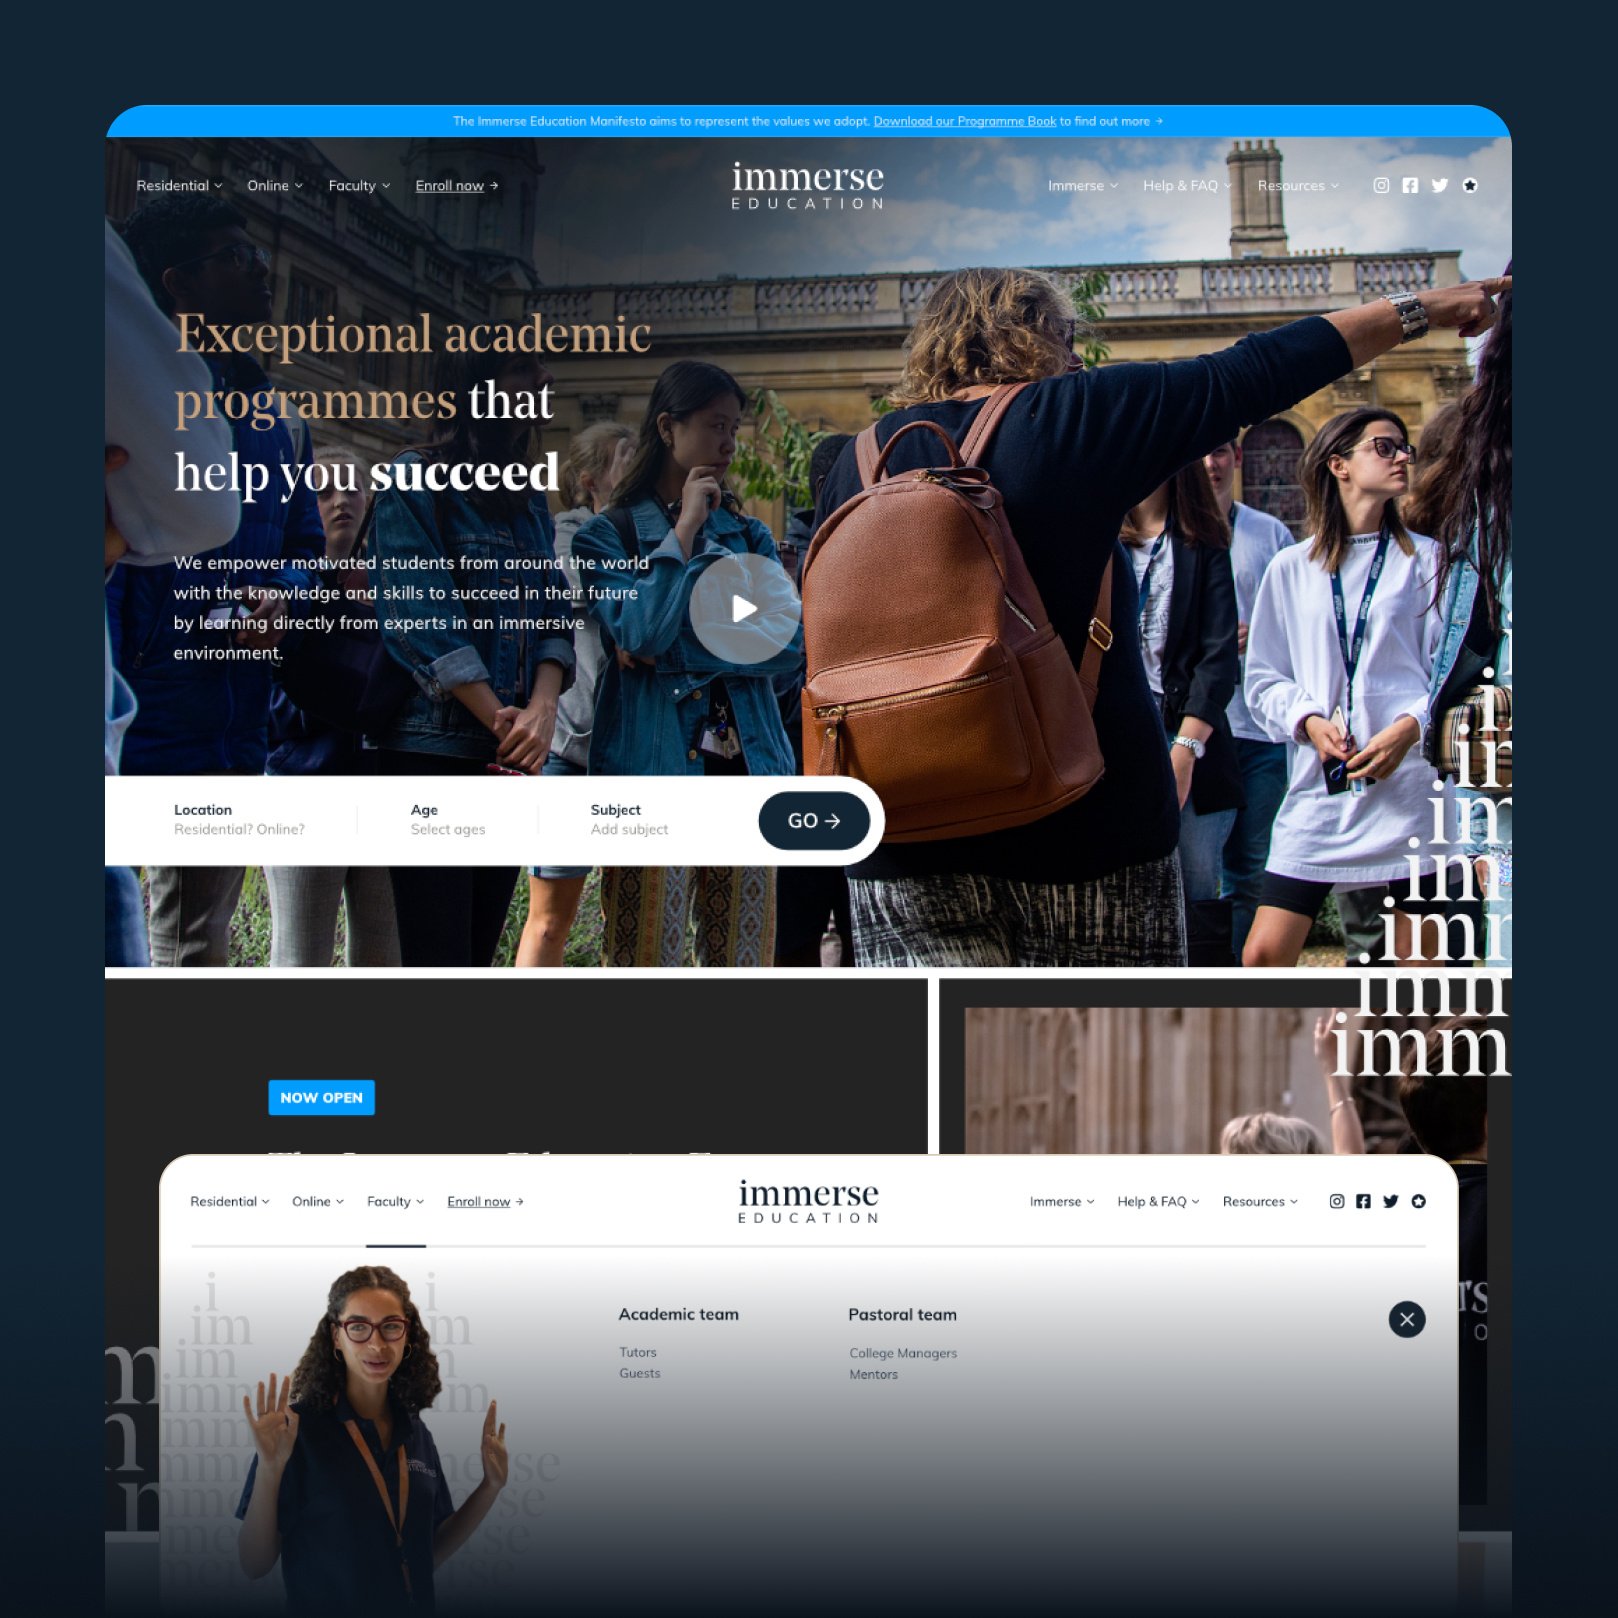 Designing UI for an Exceptional Academic Brand